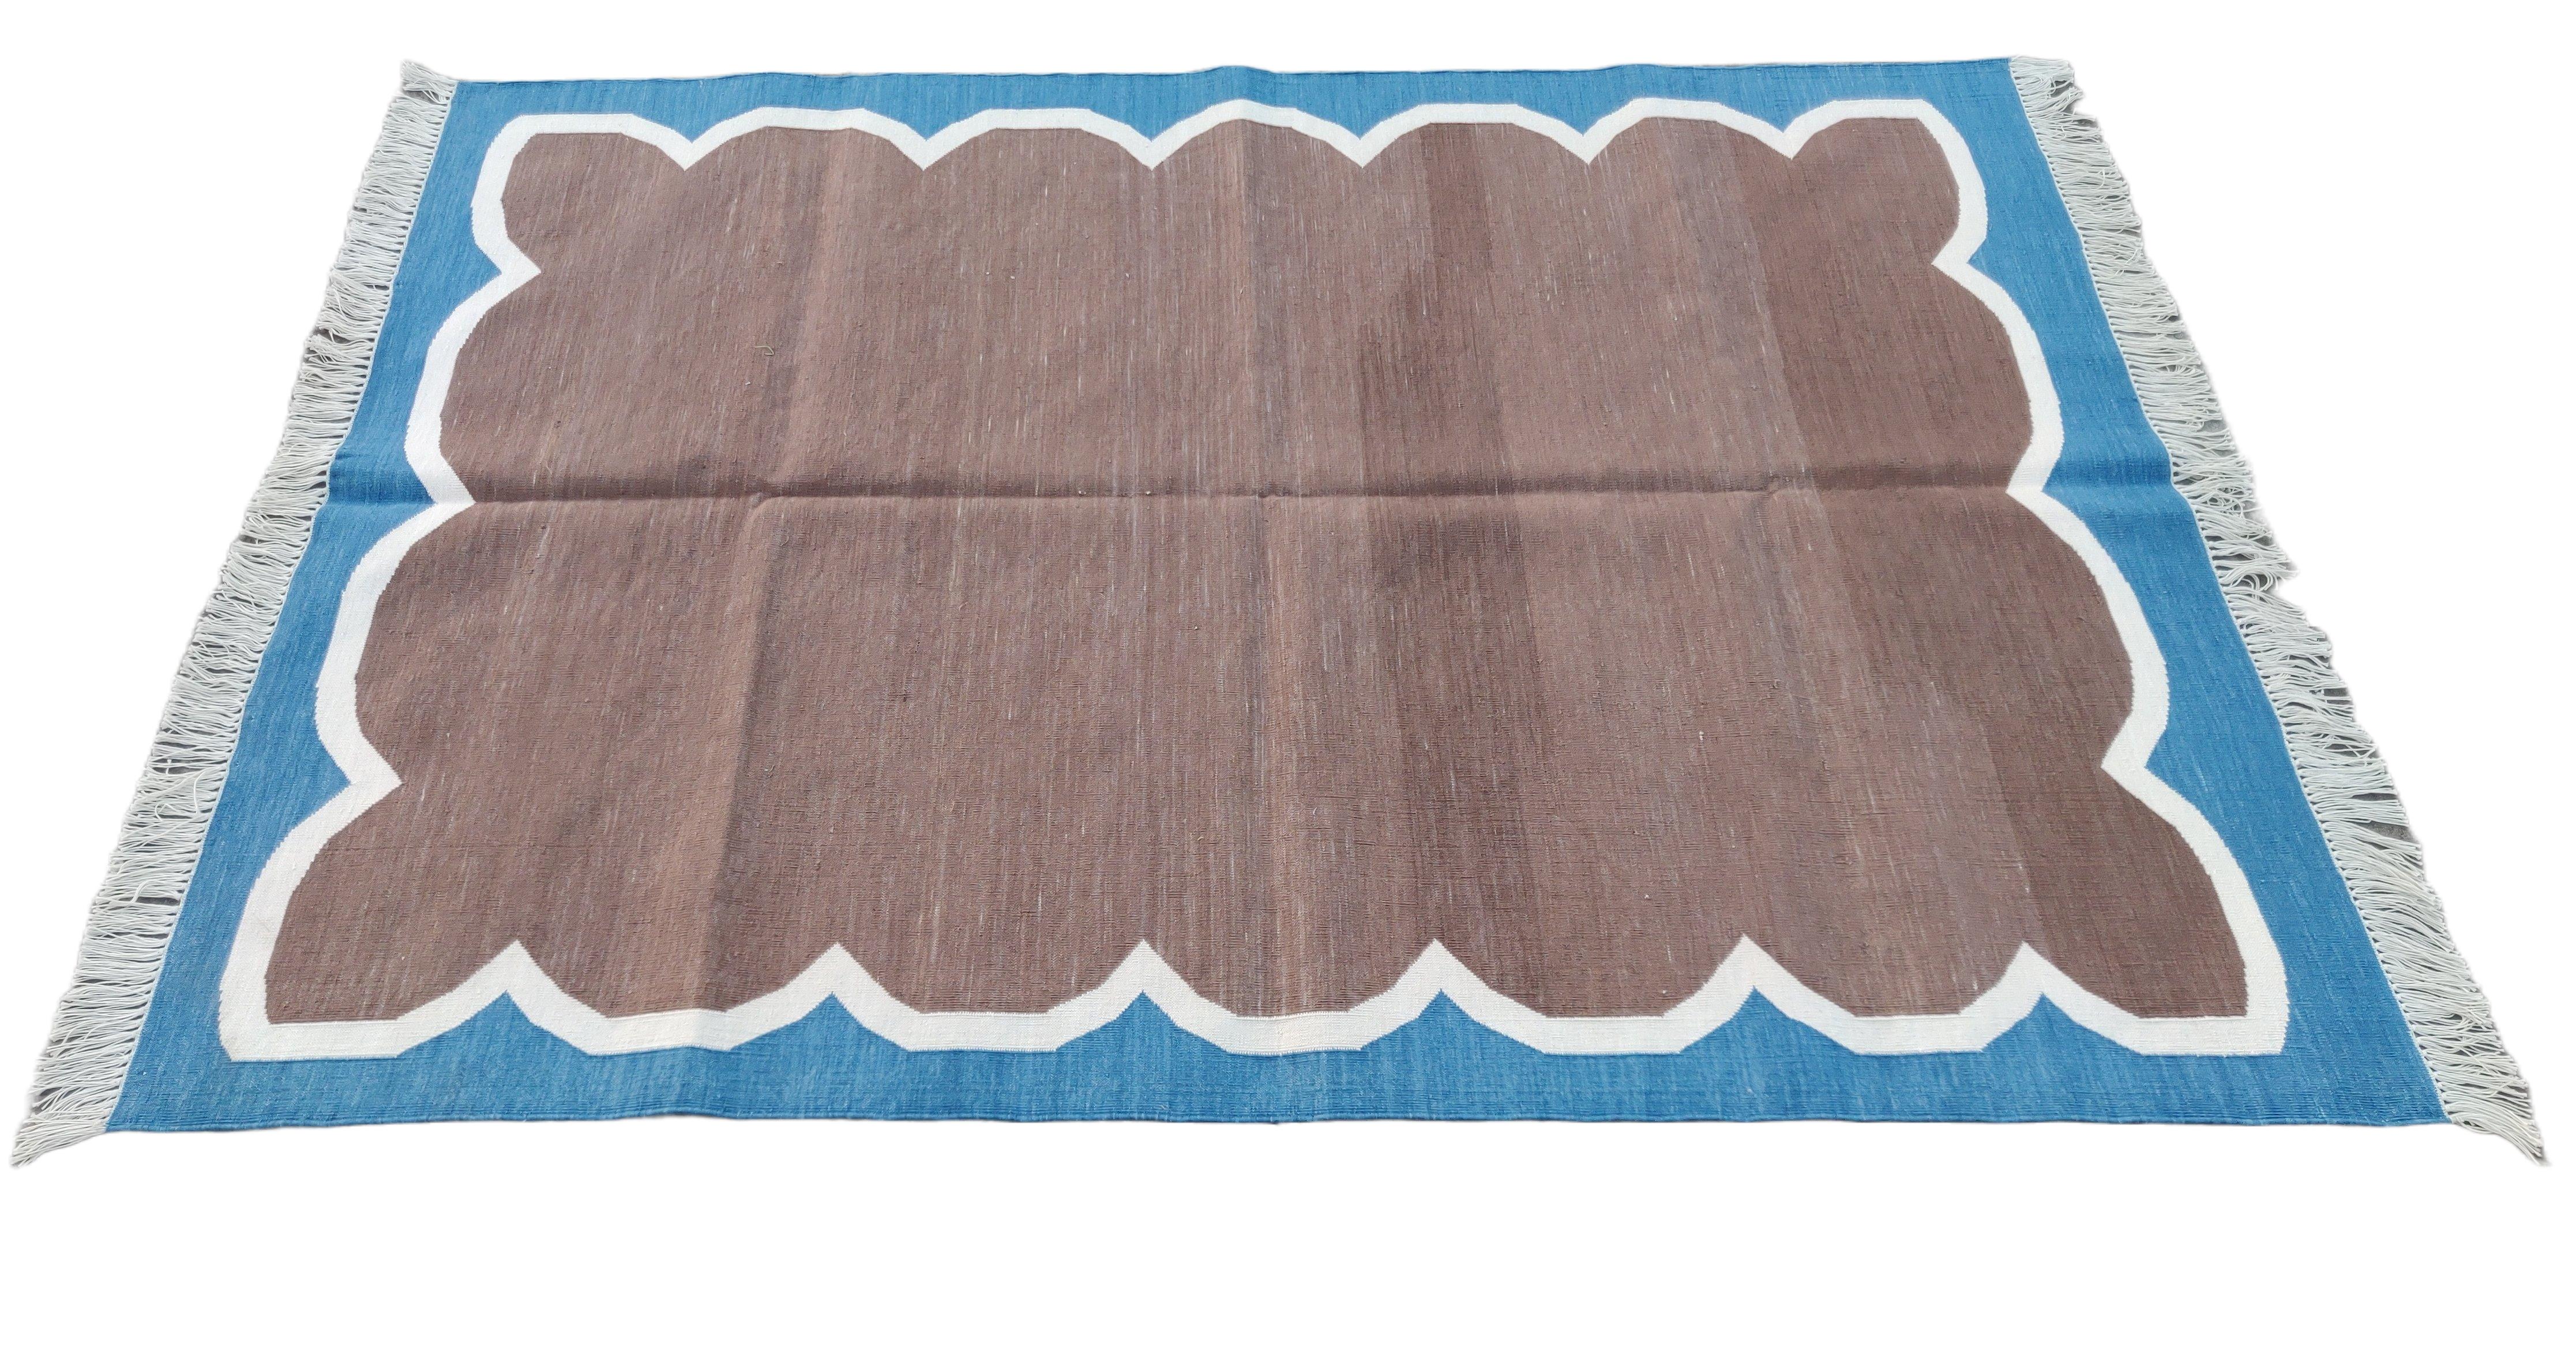 Hand-Woven Handmade Cotton Area Flat Weave Rug, 4x6 Brown And Blue Scalloped Indian Dhurrie For Sale